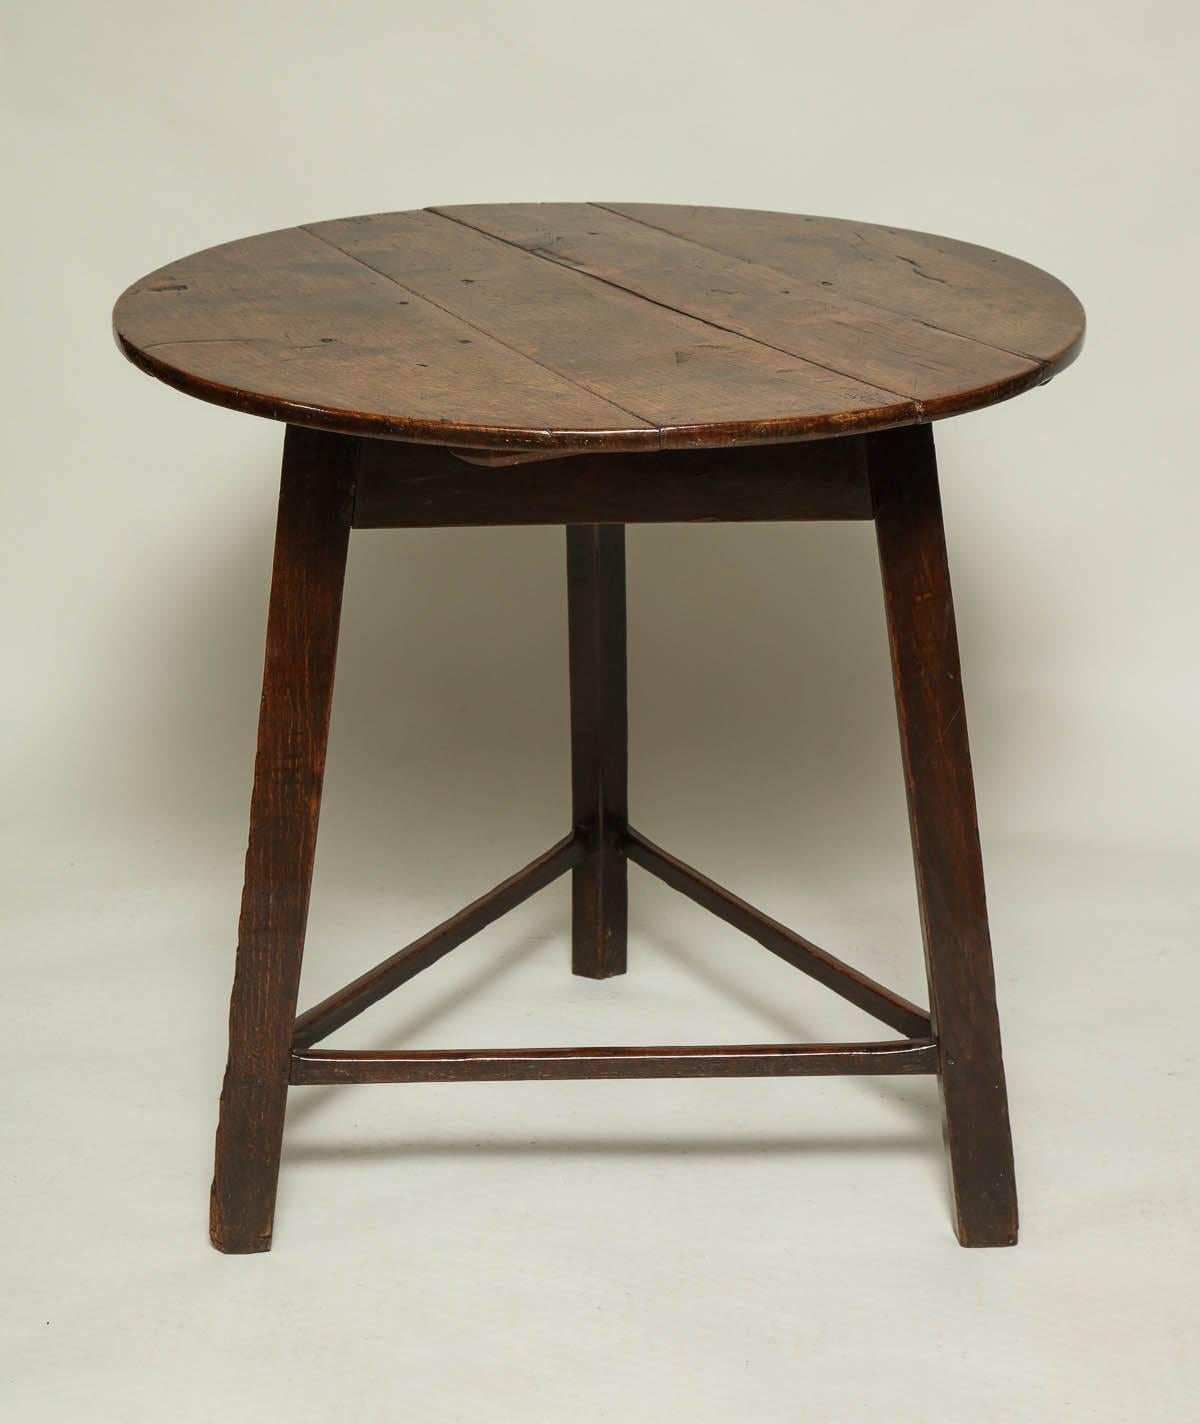 Fine 18th century welsh or English oak cricket table, the vividly grained top with simple rounded edge, over square legs jointed by simple triangle stretcher, the whole possessing good, rich color and patina.